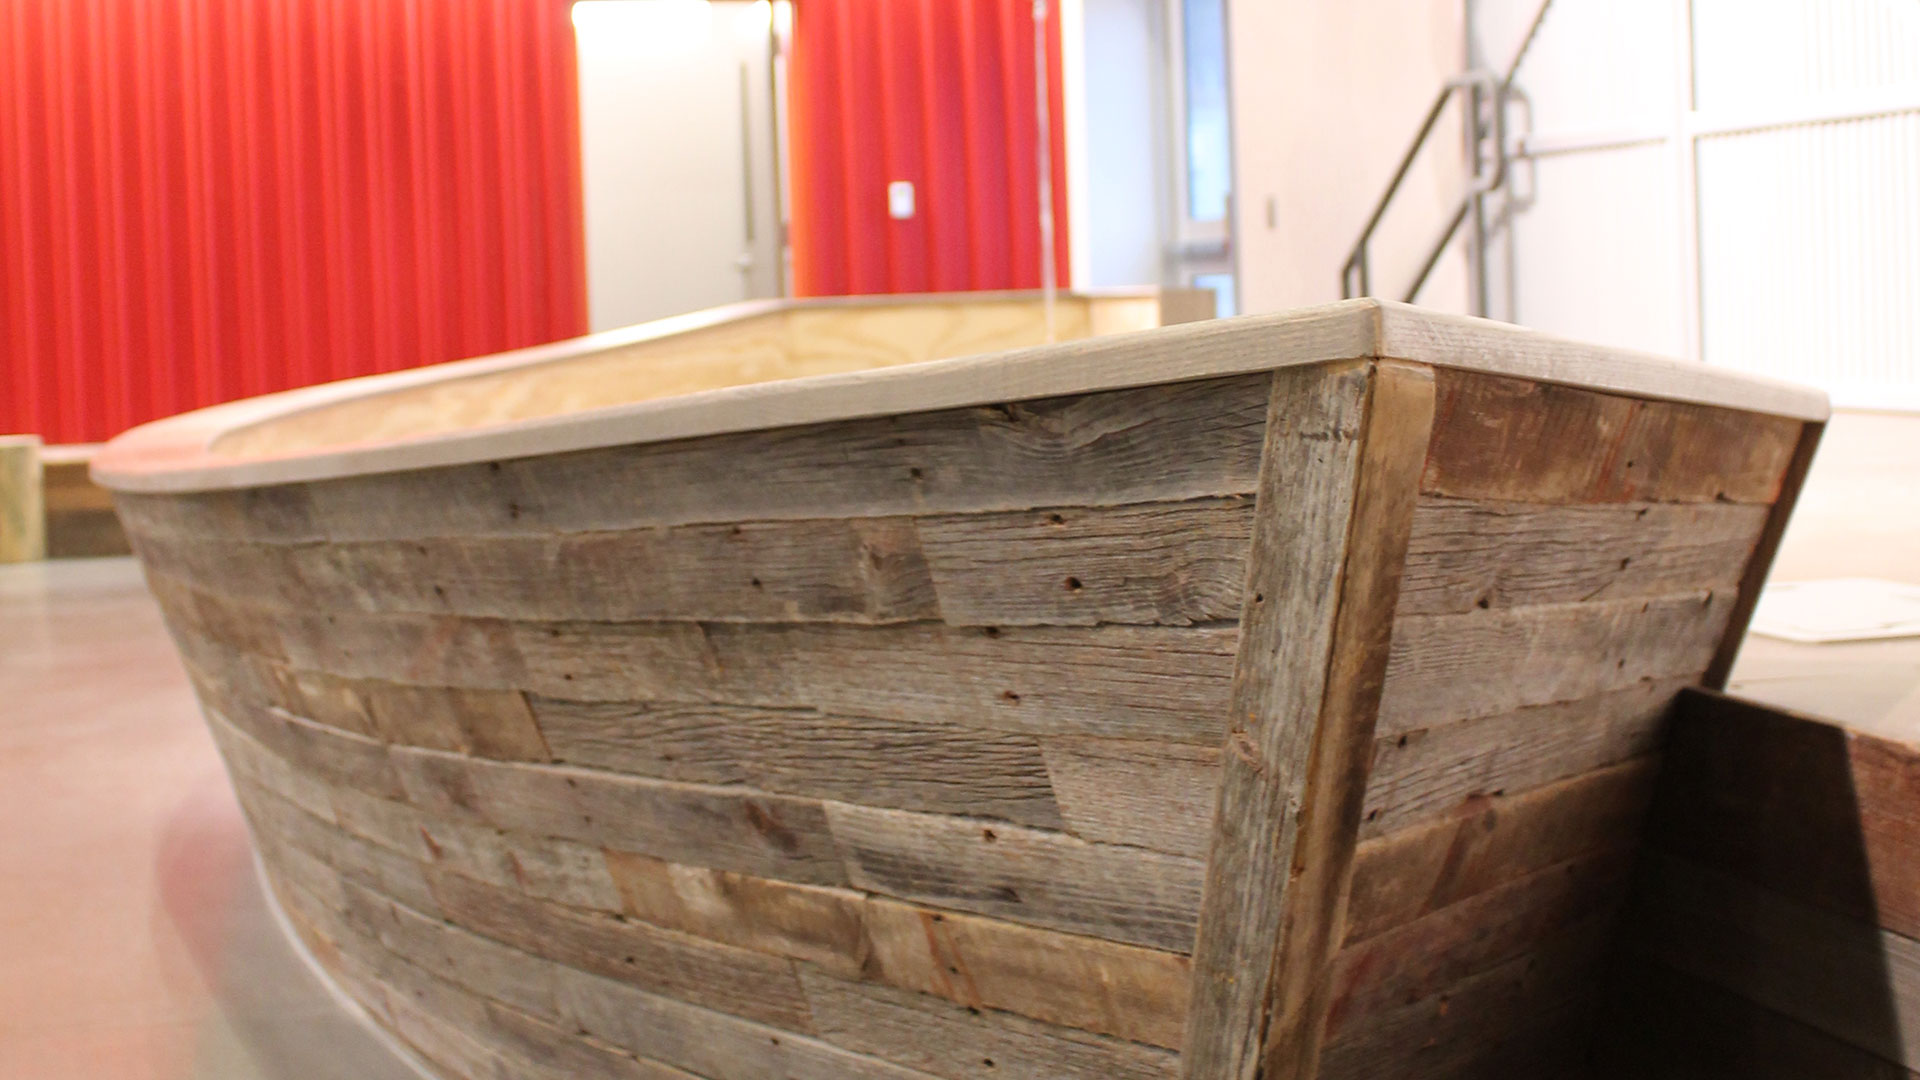 Reclaimed wood boat stage in WE Kids area at The Water's Edge Church in Omaha, NE